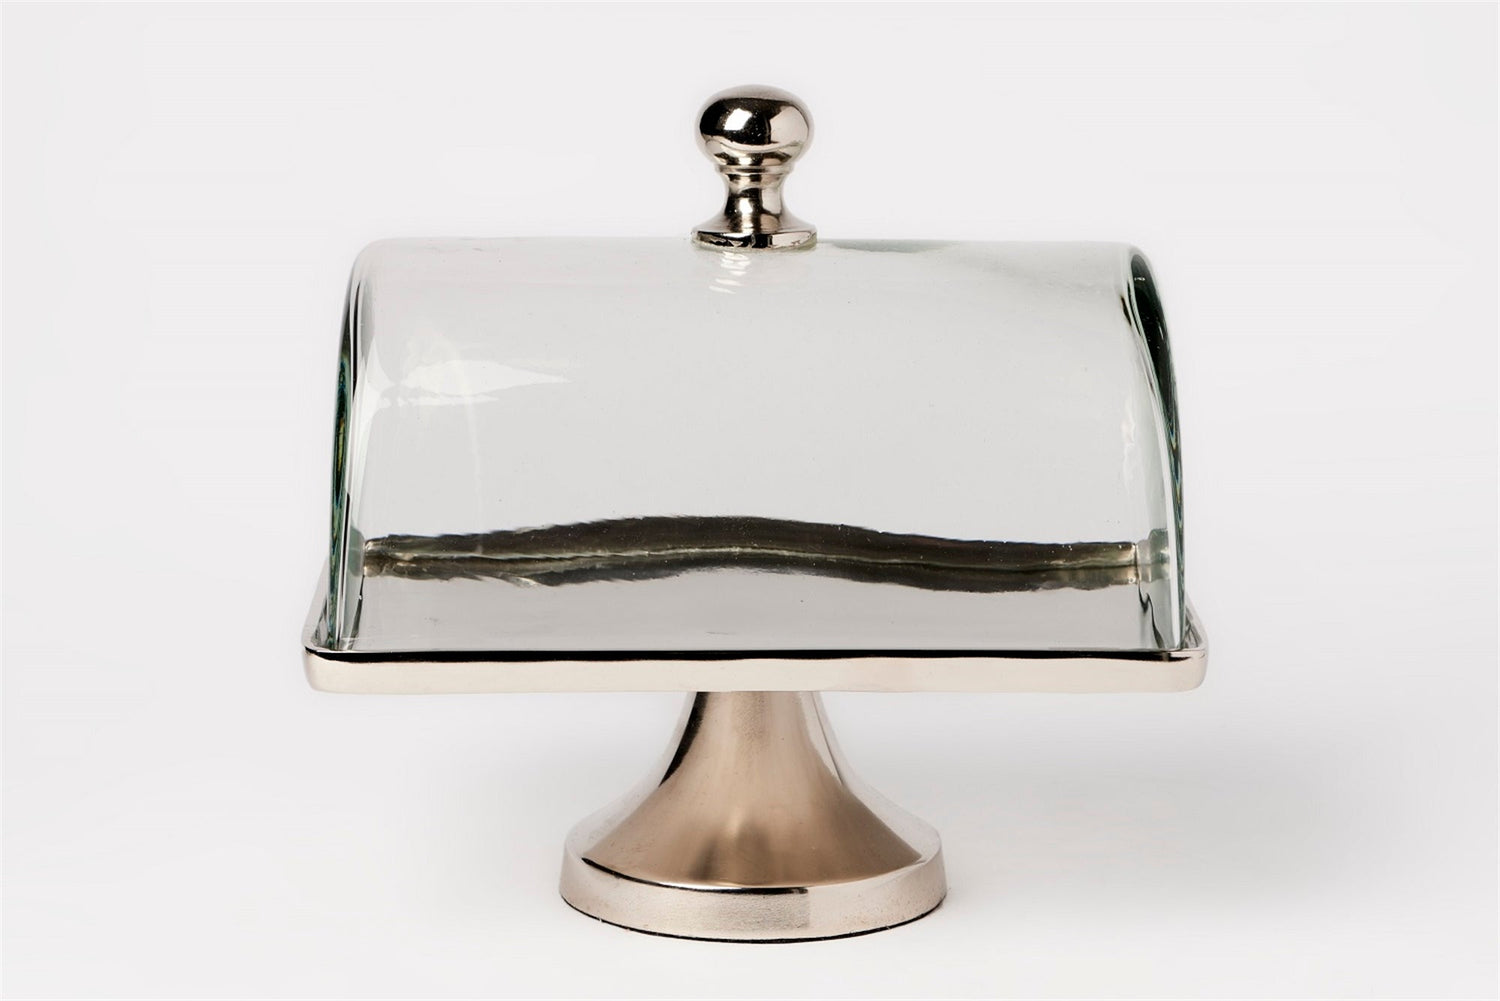 A Hester &amp; Cook Aluminum and Glass Serving Stand &amp; Dome, perfect for showcasing special items.